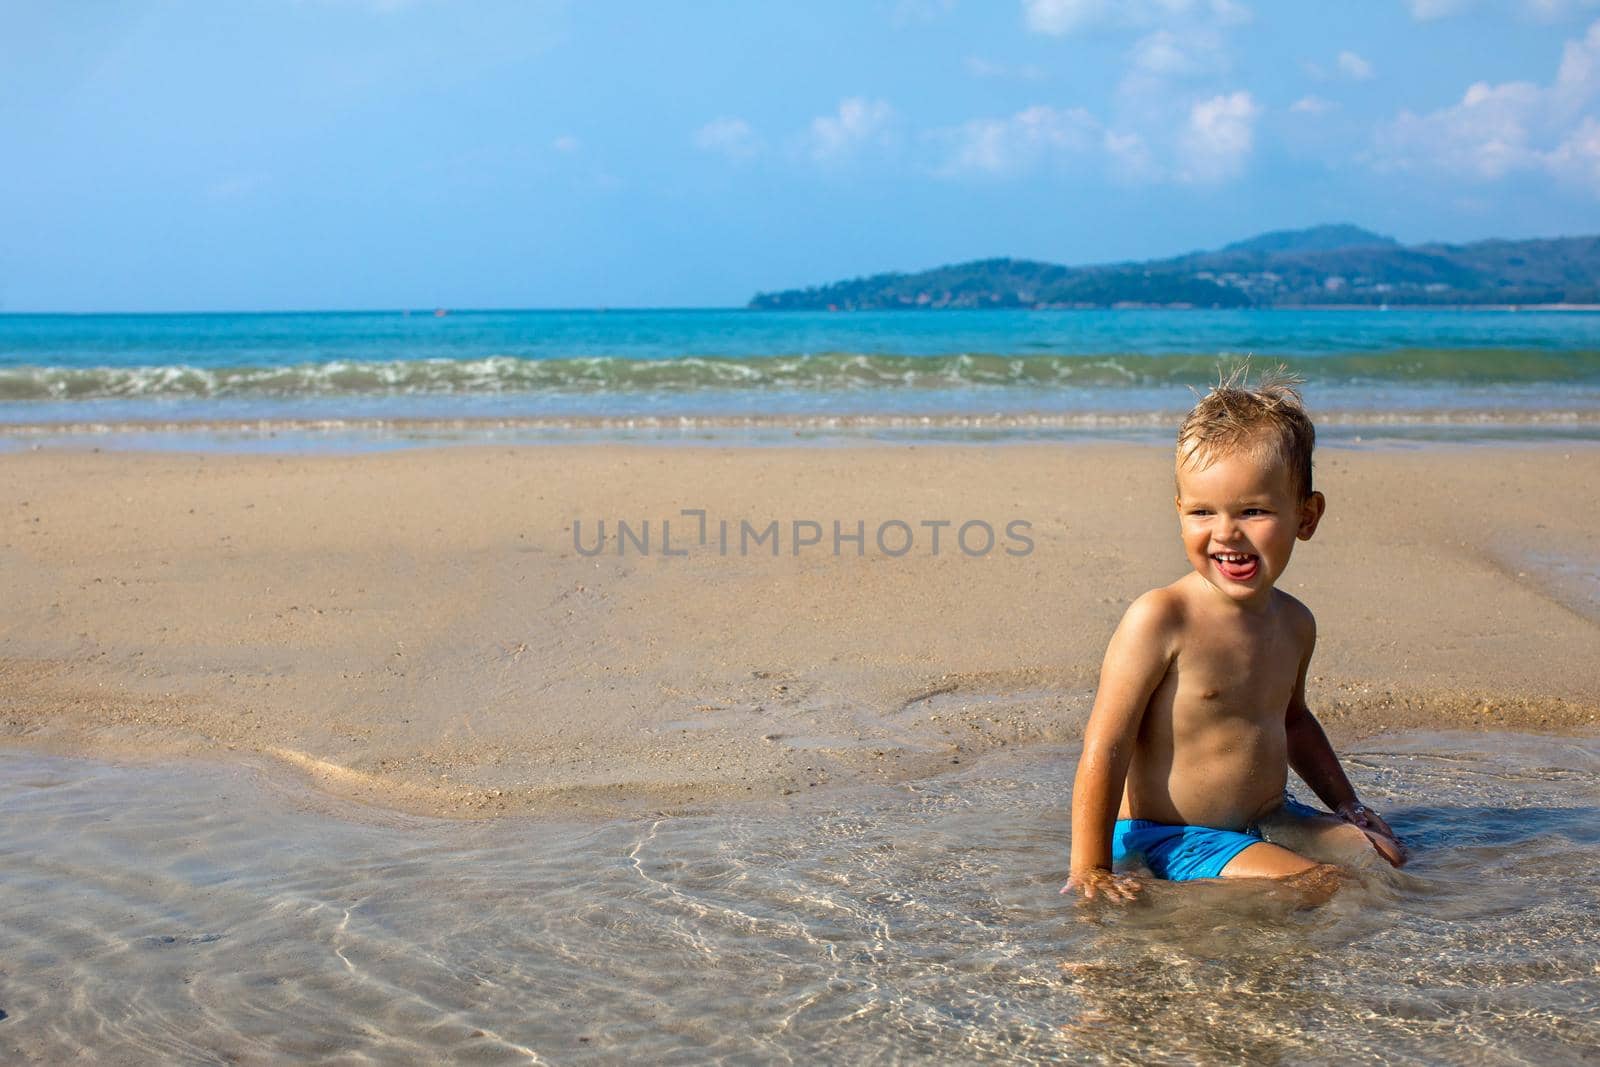 Joyful adorable small boy enjoying water while resting and sitting in water on coastline in summertime